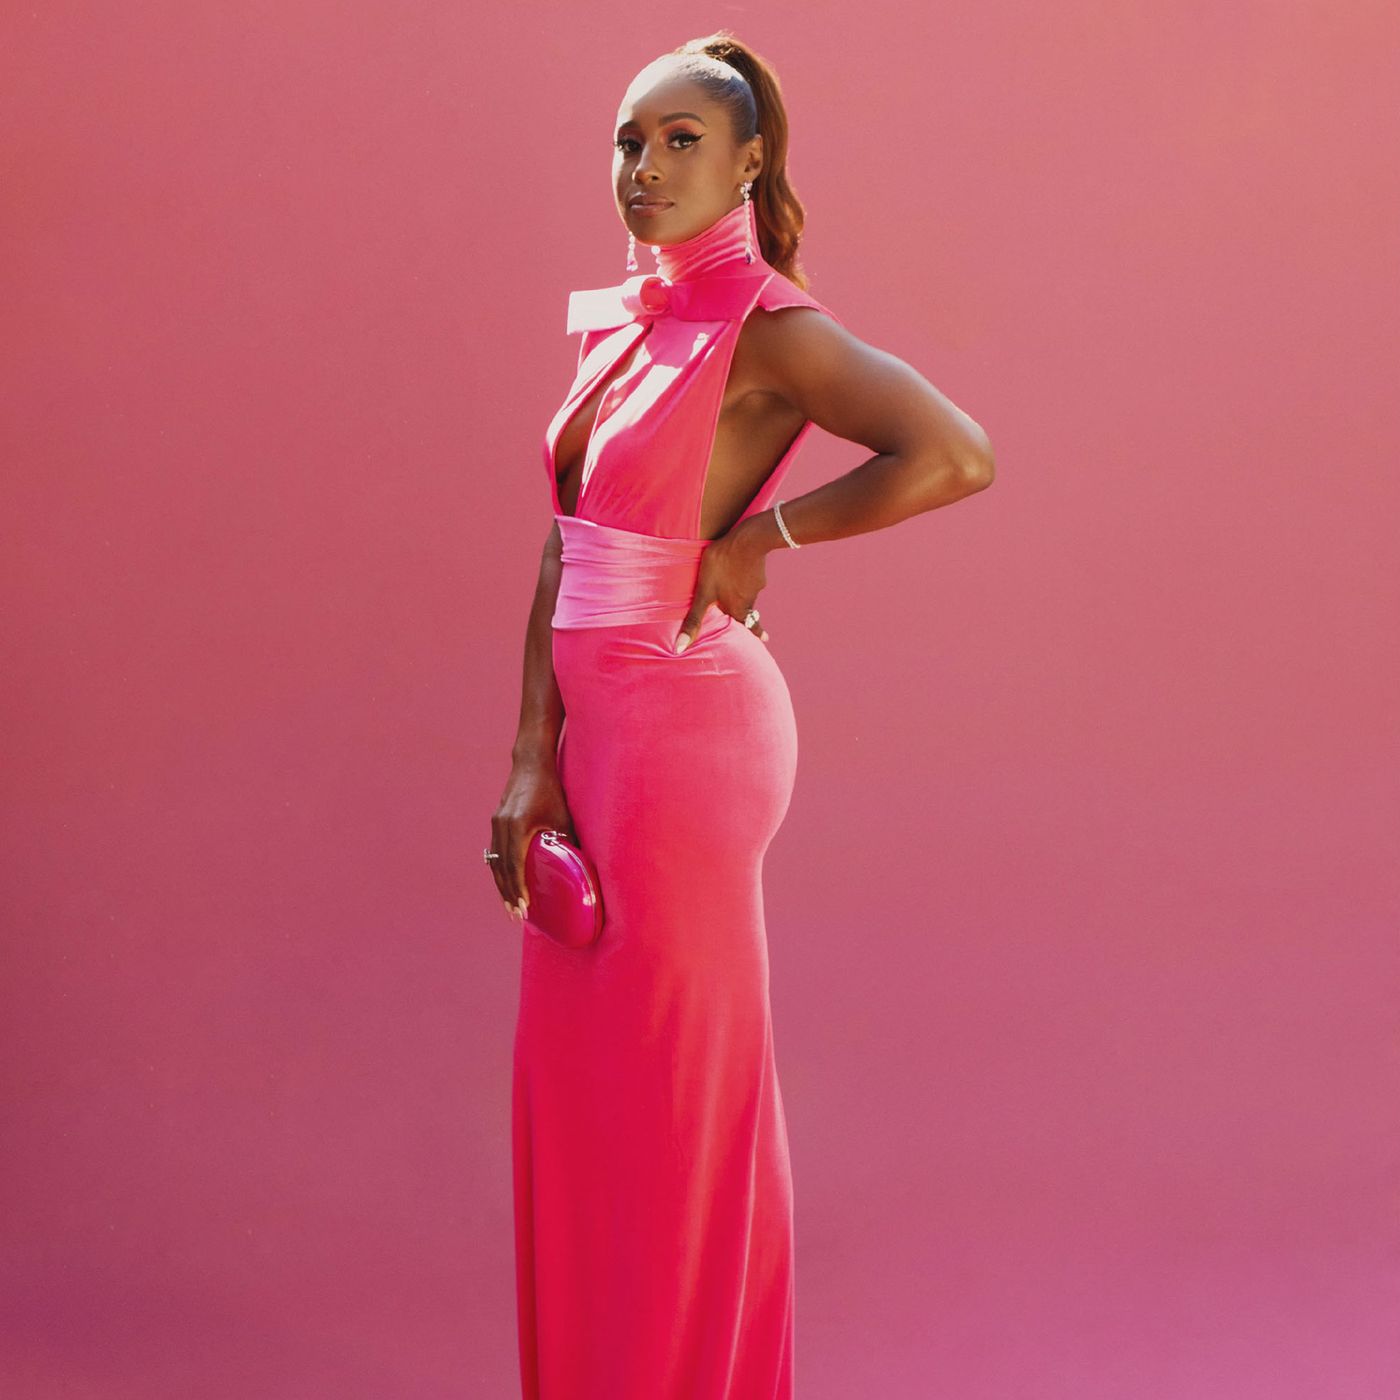 Issa Rae at the Barbie London Photocall, July 2023, Issa Rae's  Boob-Window Gown Takes Barbiecore to a New Level